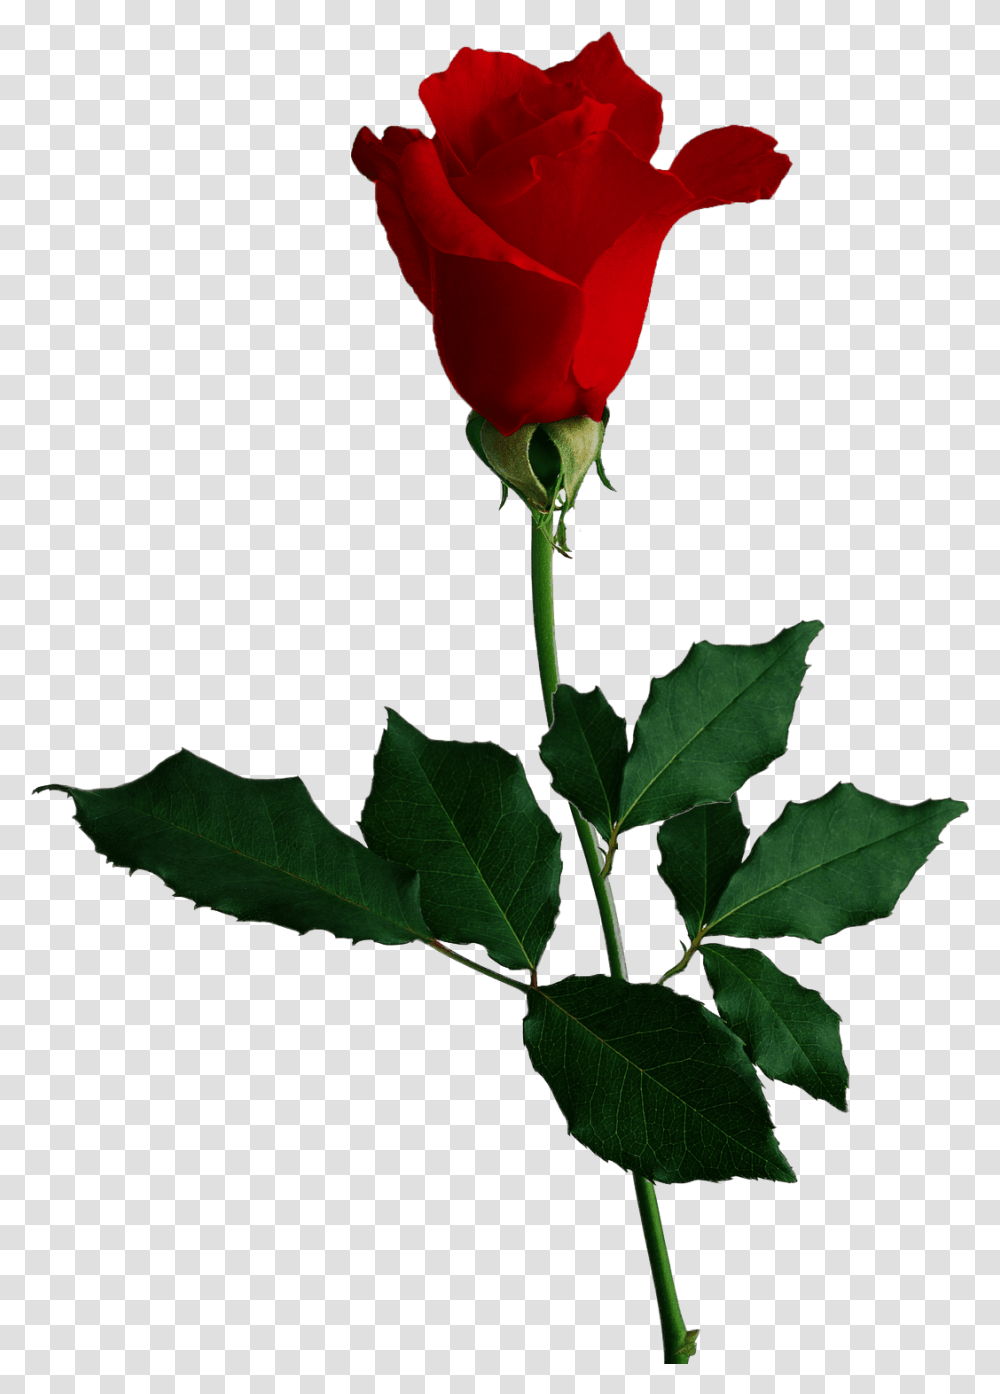 Red Rose Image Flower Red Rose No Background, Plant, Blossom, Acanthaceae Transparent Png